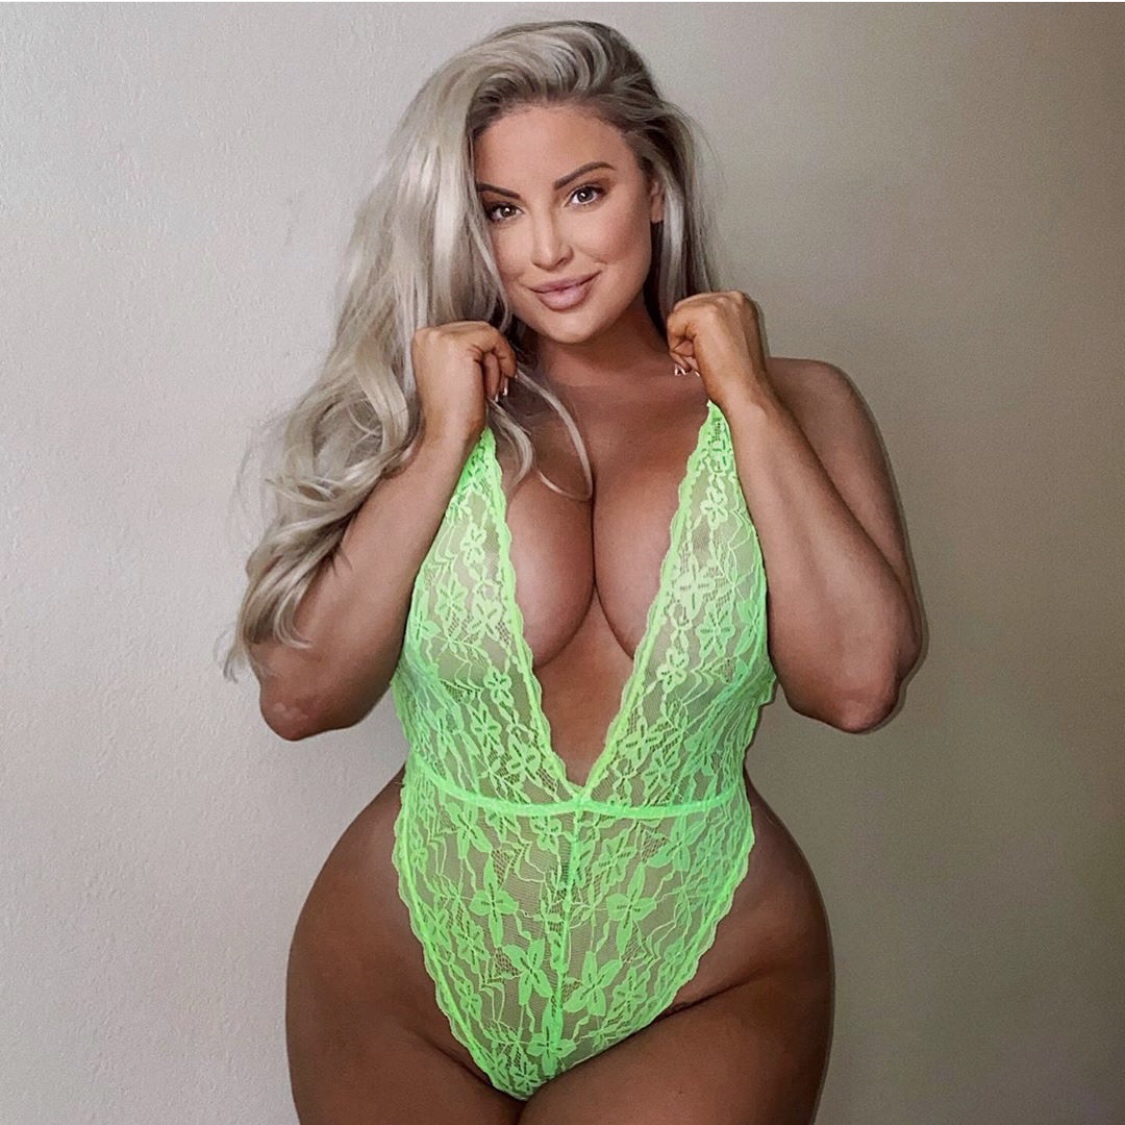 barf onme recommends ashley alexiss nude pics pic